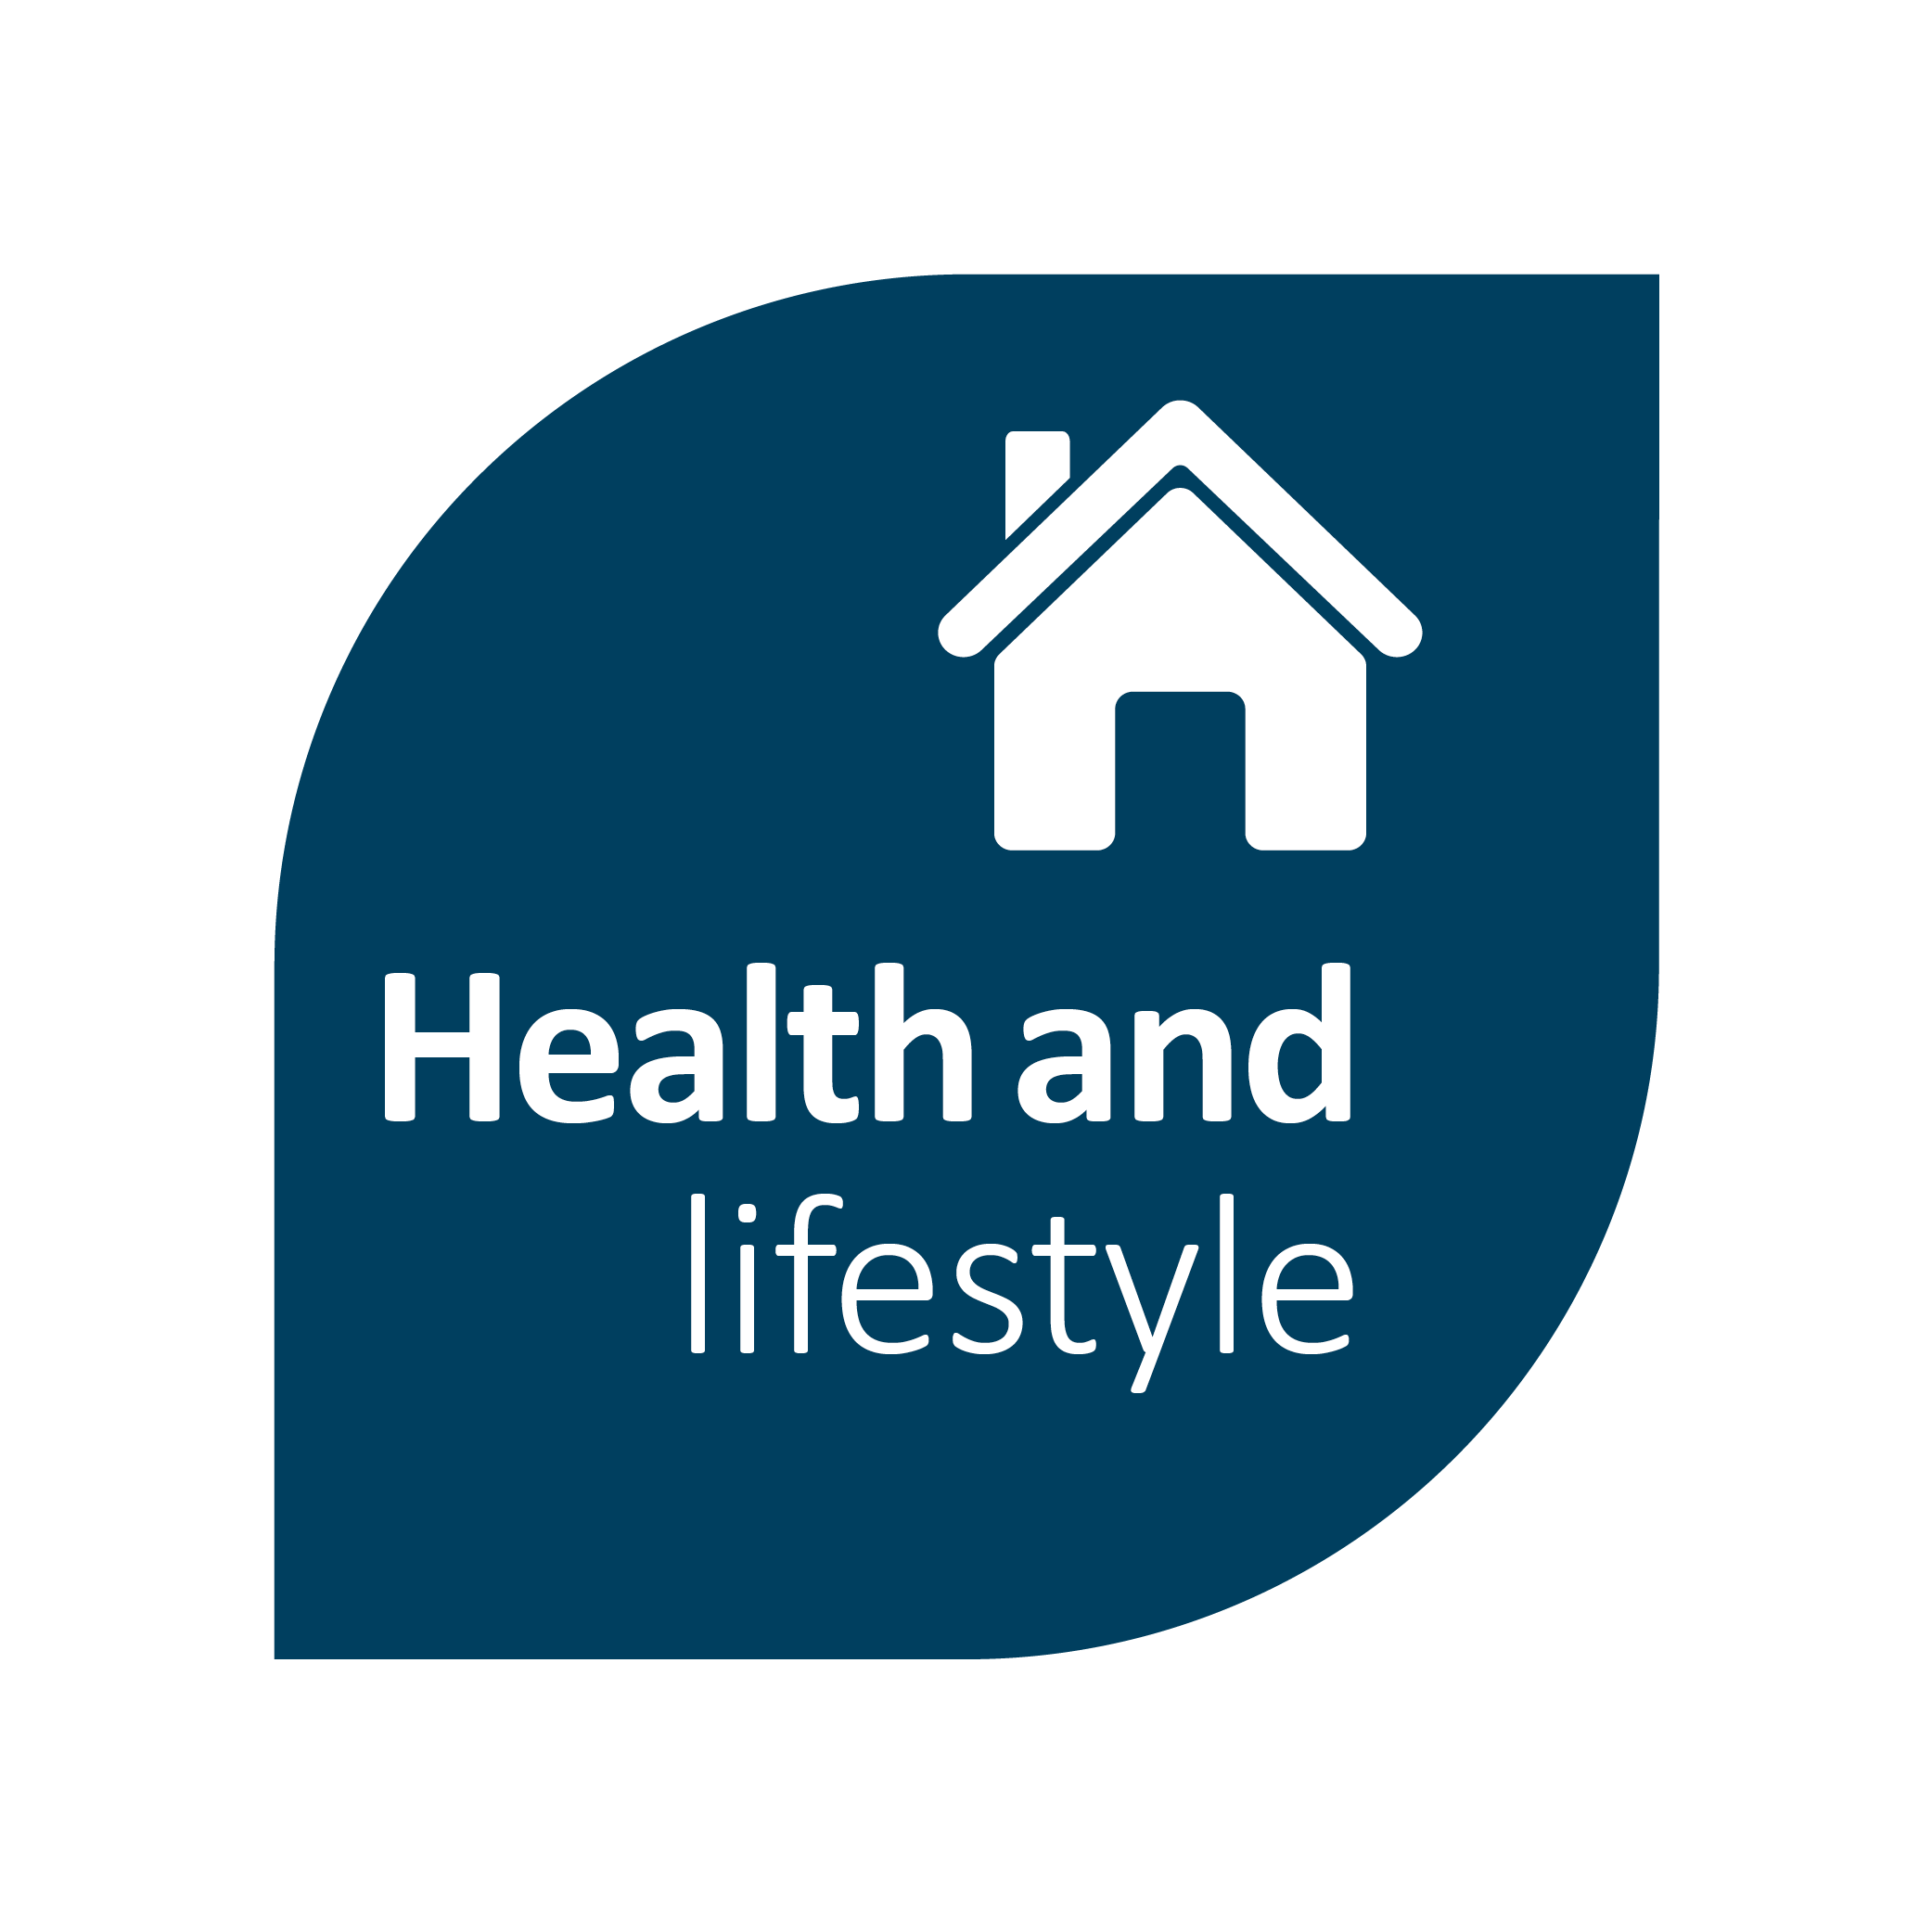 Text that reads 'Health and lifestyle' in a navy blue leaf shaped object with a house image inside it